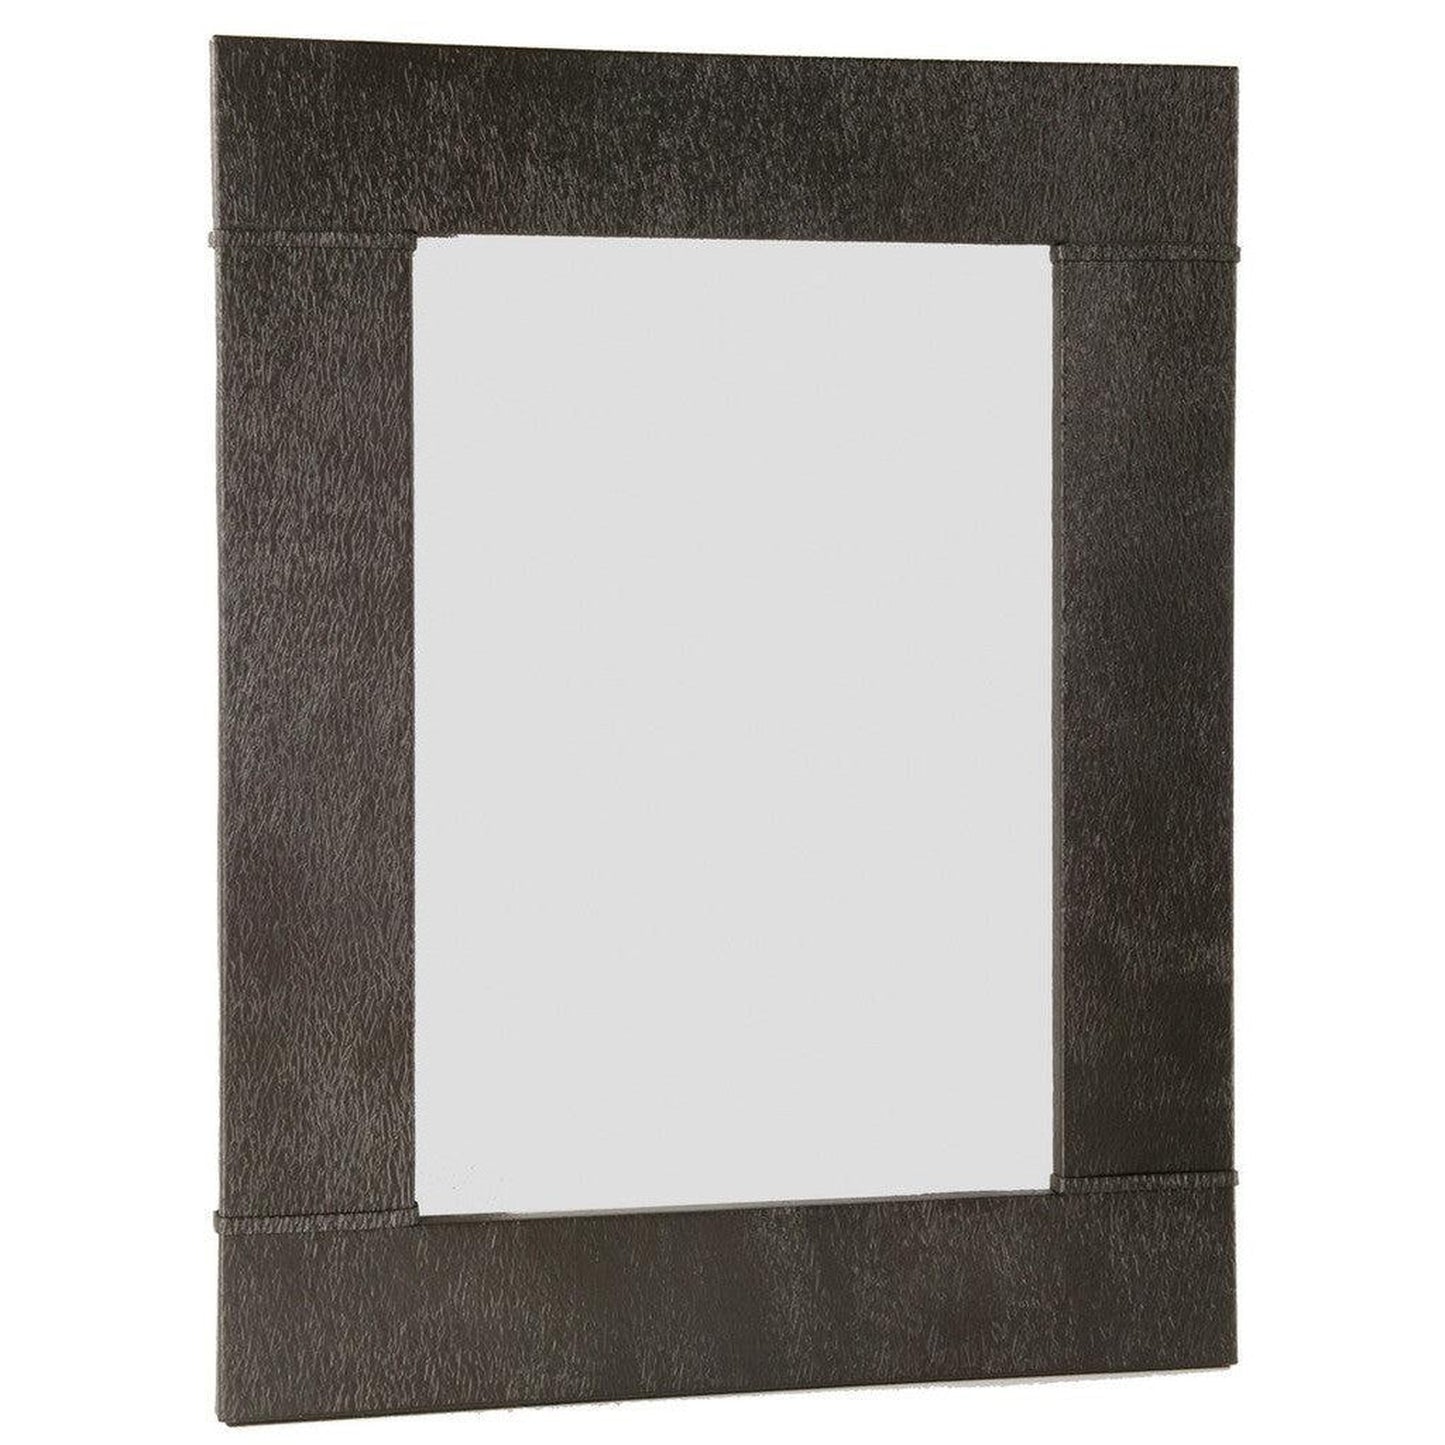 Stone County Ironworks Cedarvale 31" x 35" Small Chalk White Iron Wall Mirror With Pewter Iron Accent